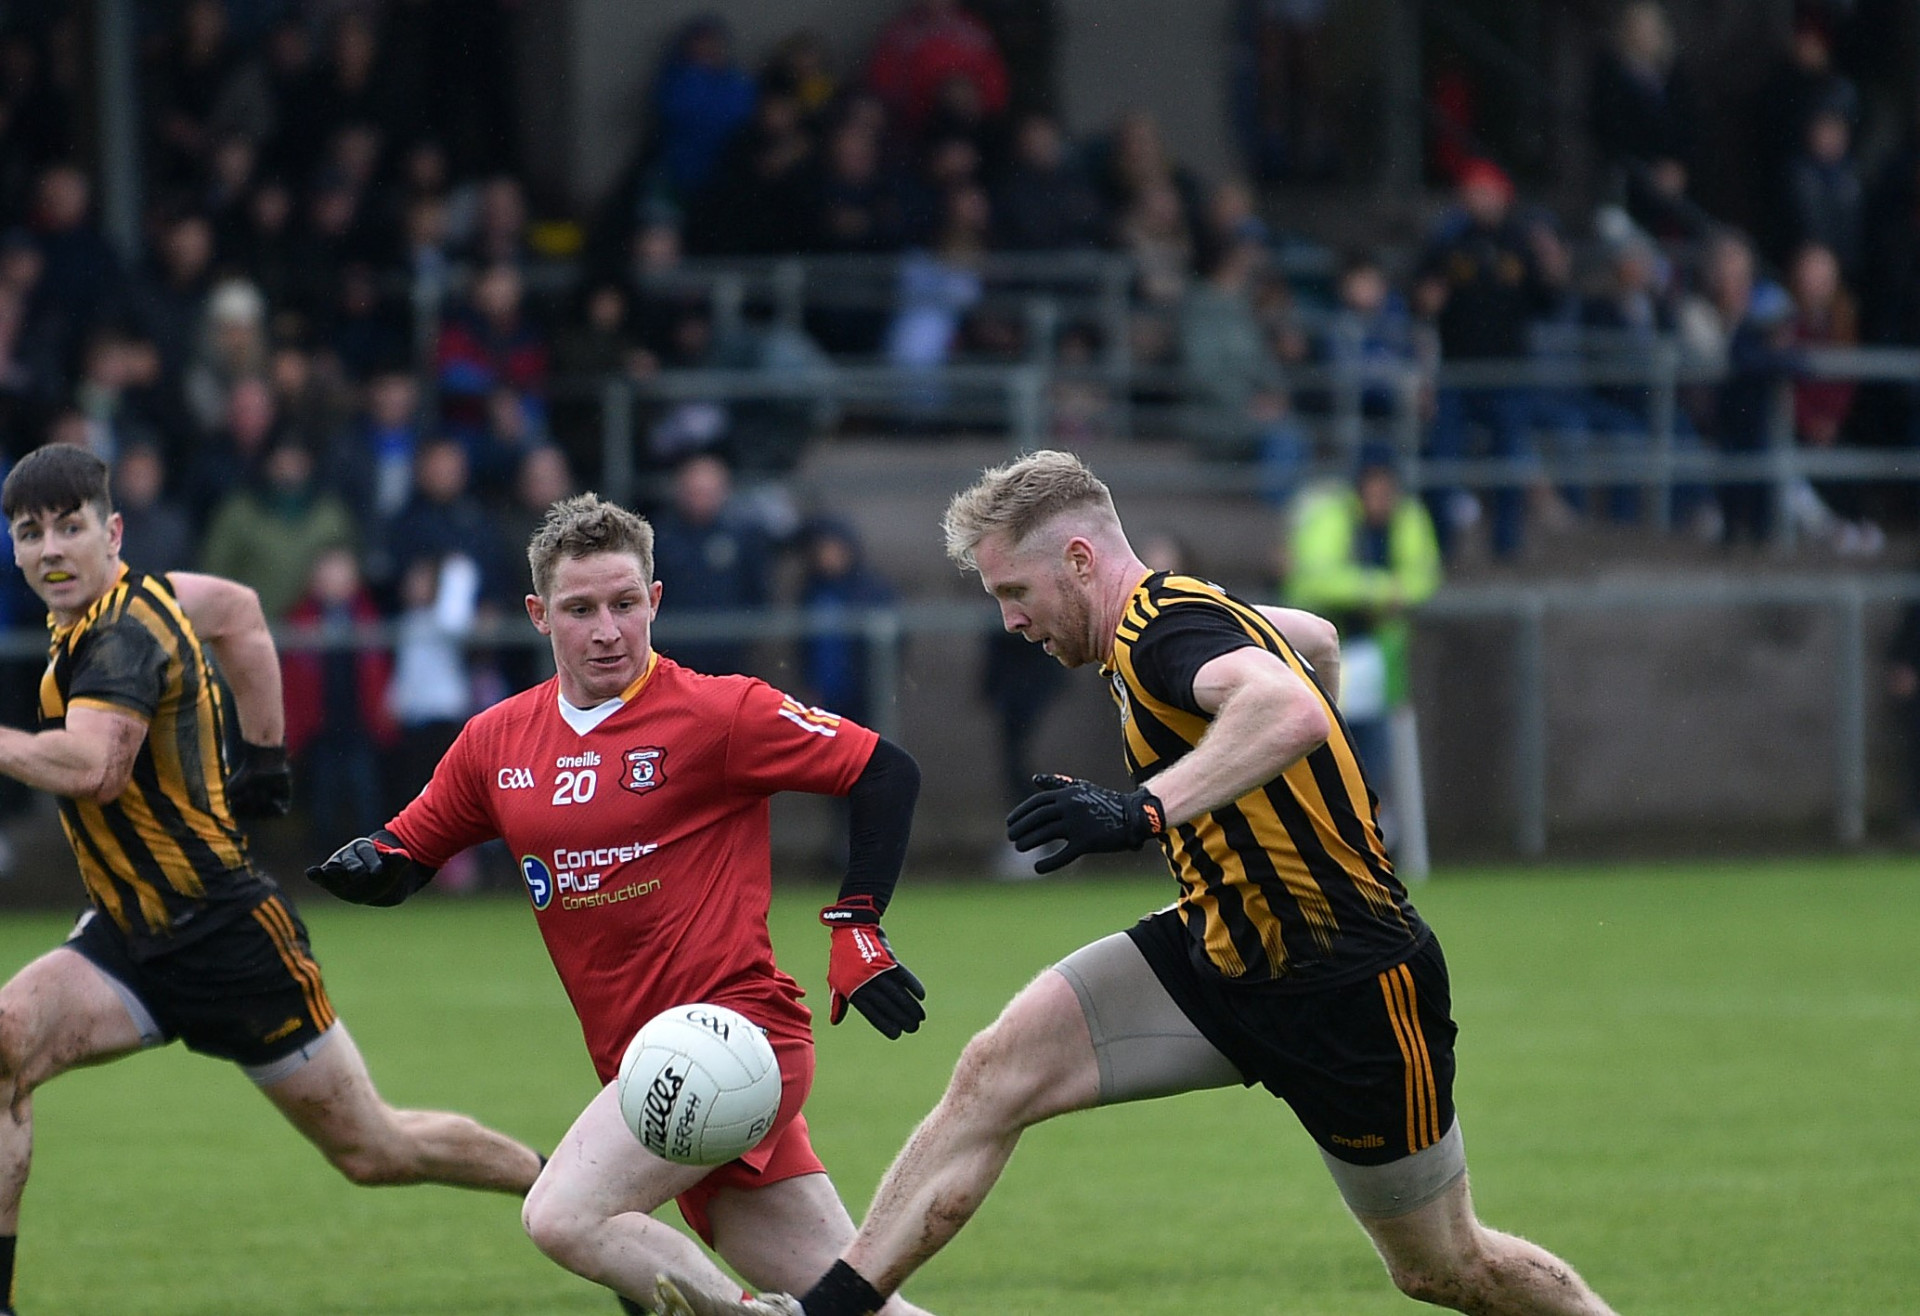 Pomeroy boss McElholm pleased with opening performance